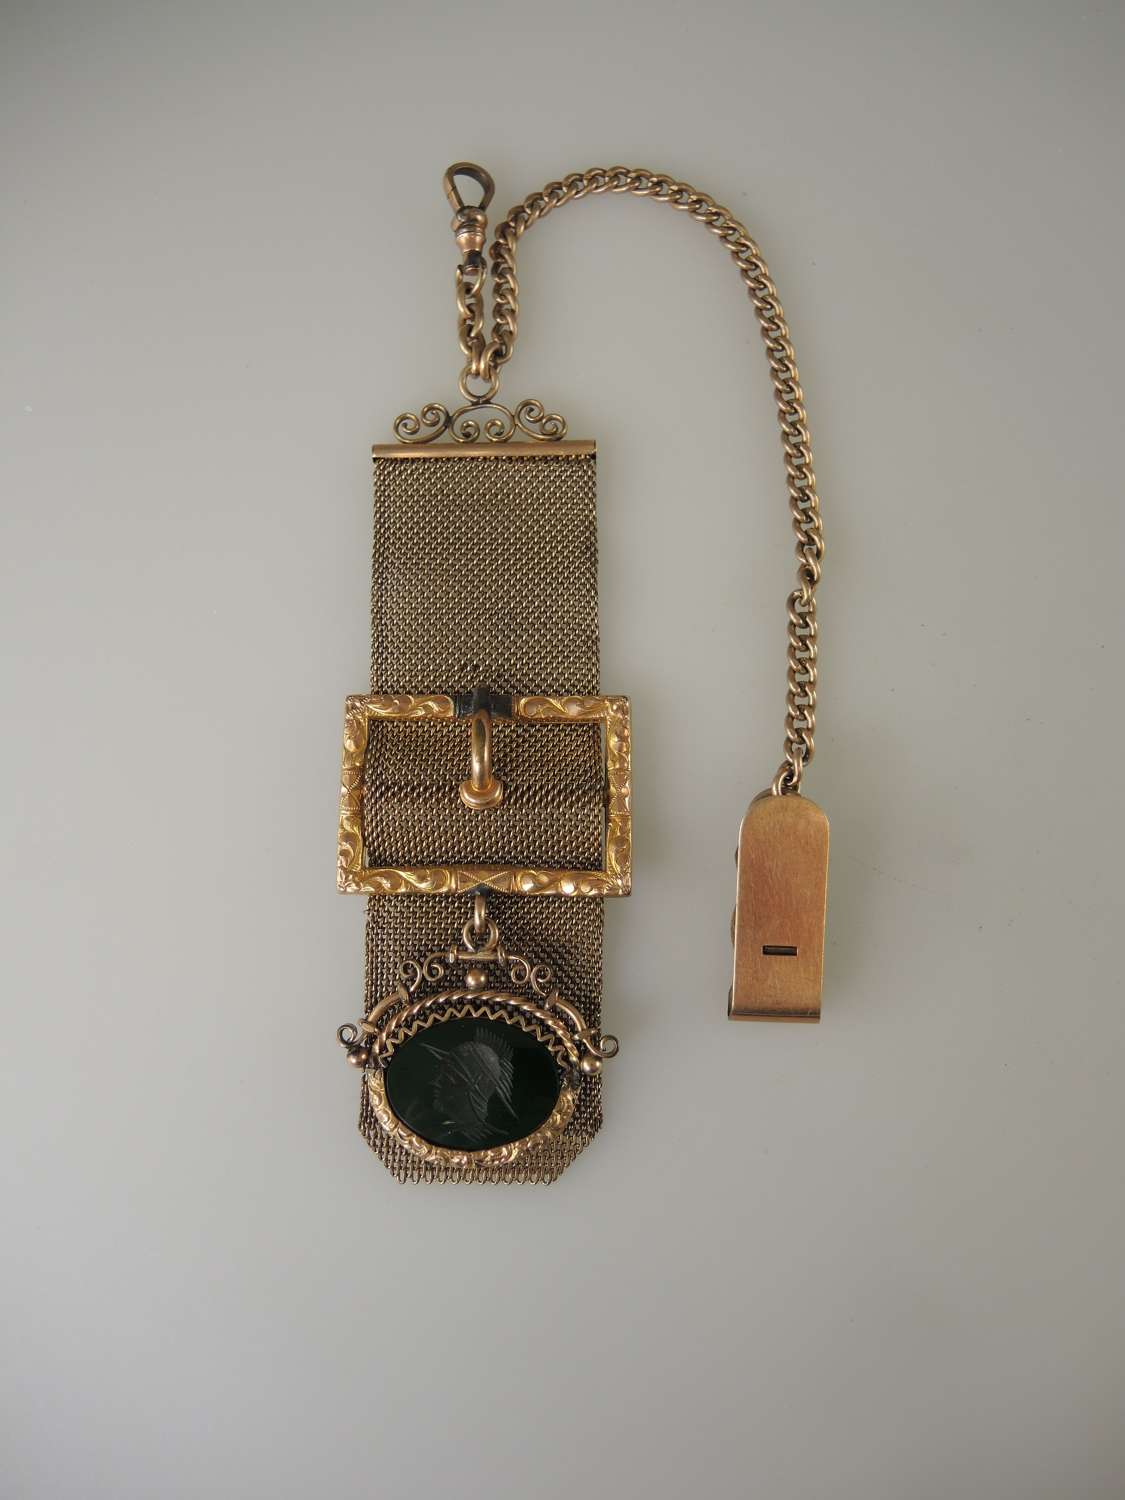 Gold plated watch strap and fob with patent clasp c1890